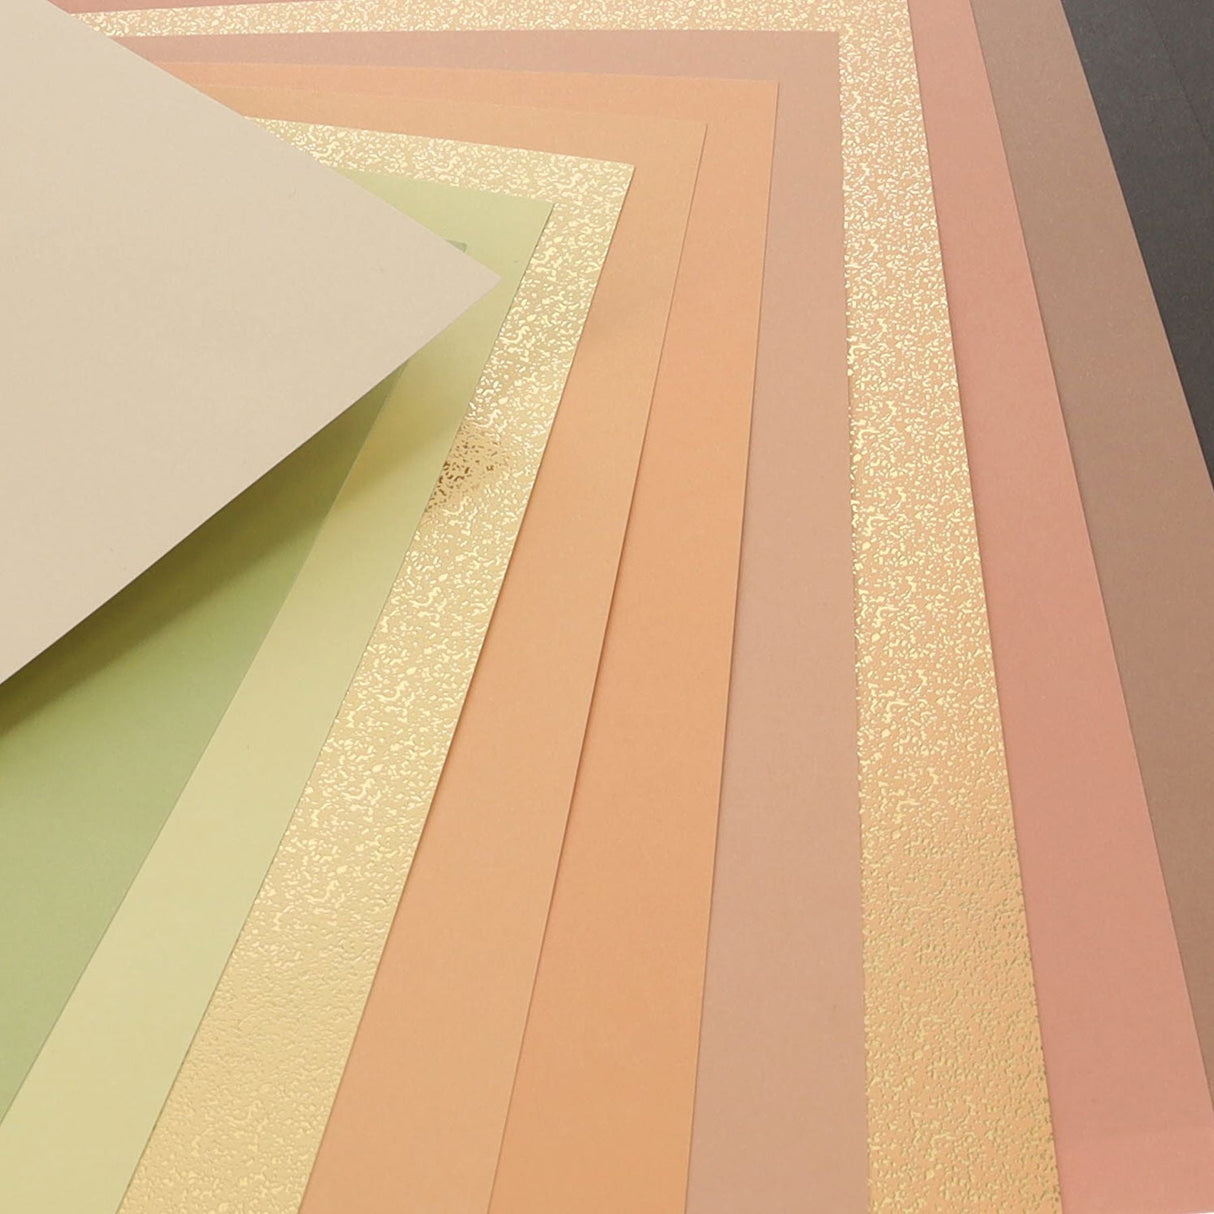 Premier Activity A4 Paper Pad - 24 Sheets - 180gsm - Shades of Gold-Craft Paper & Card-Premier|StationeryShop.co.uk